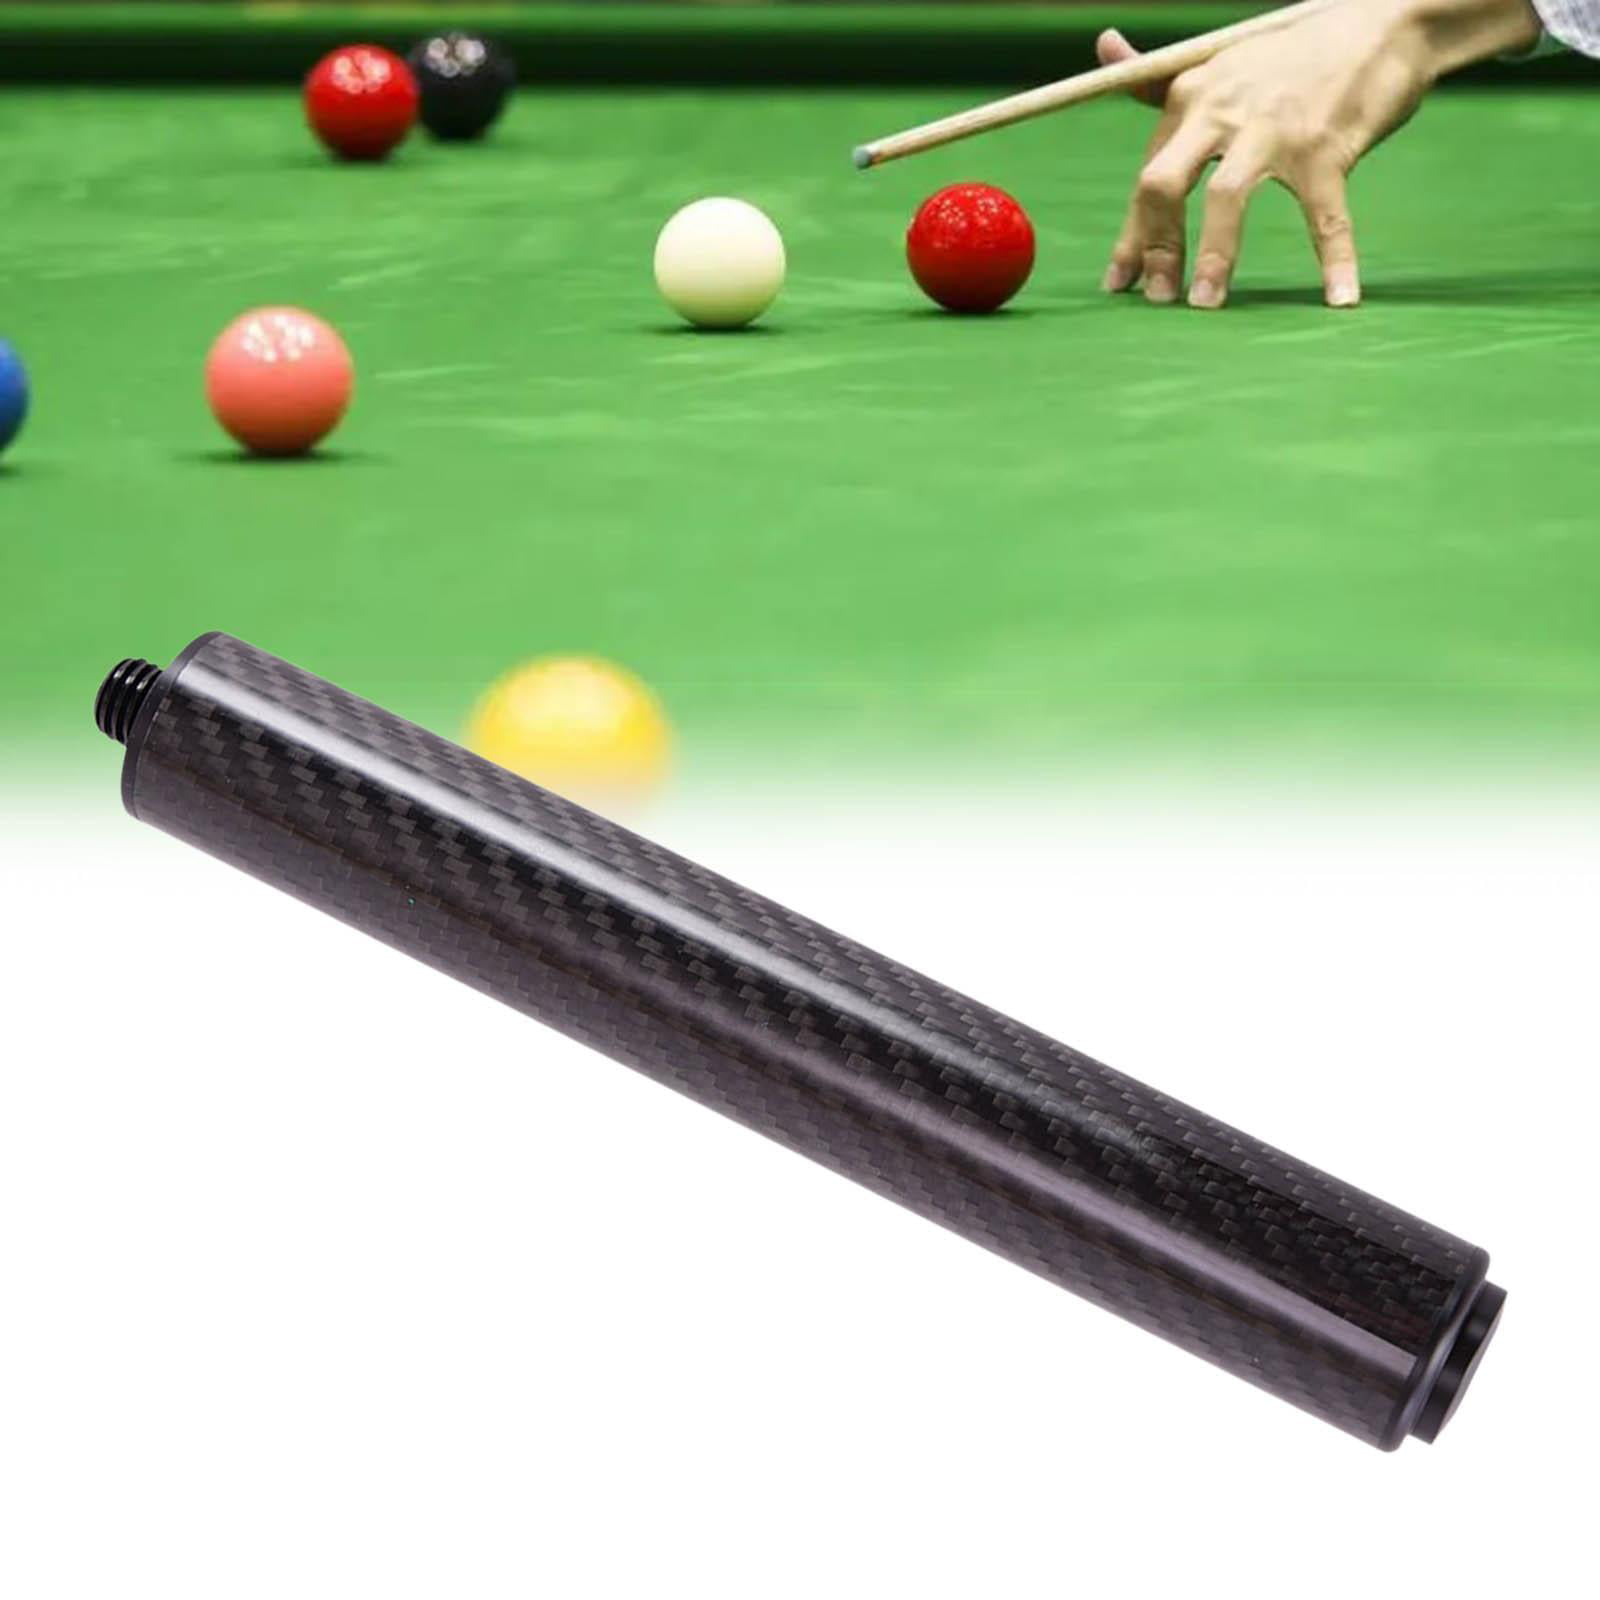 Buffalo 6" Mini Butt Extension For All Our Buffalo Snooker/ Pool Cues 